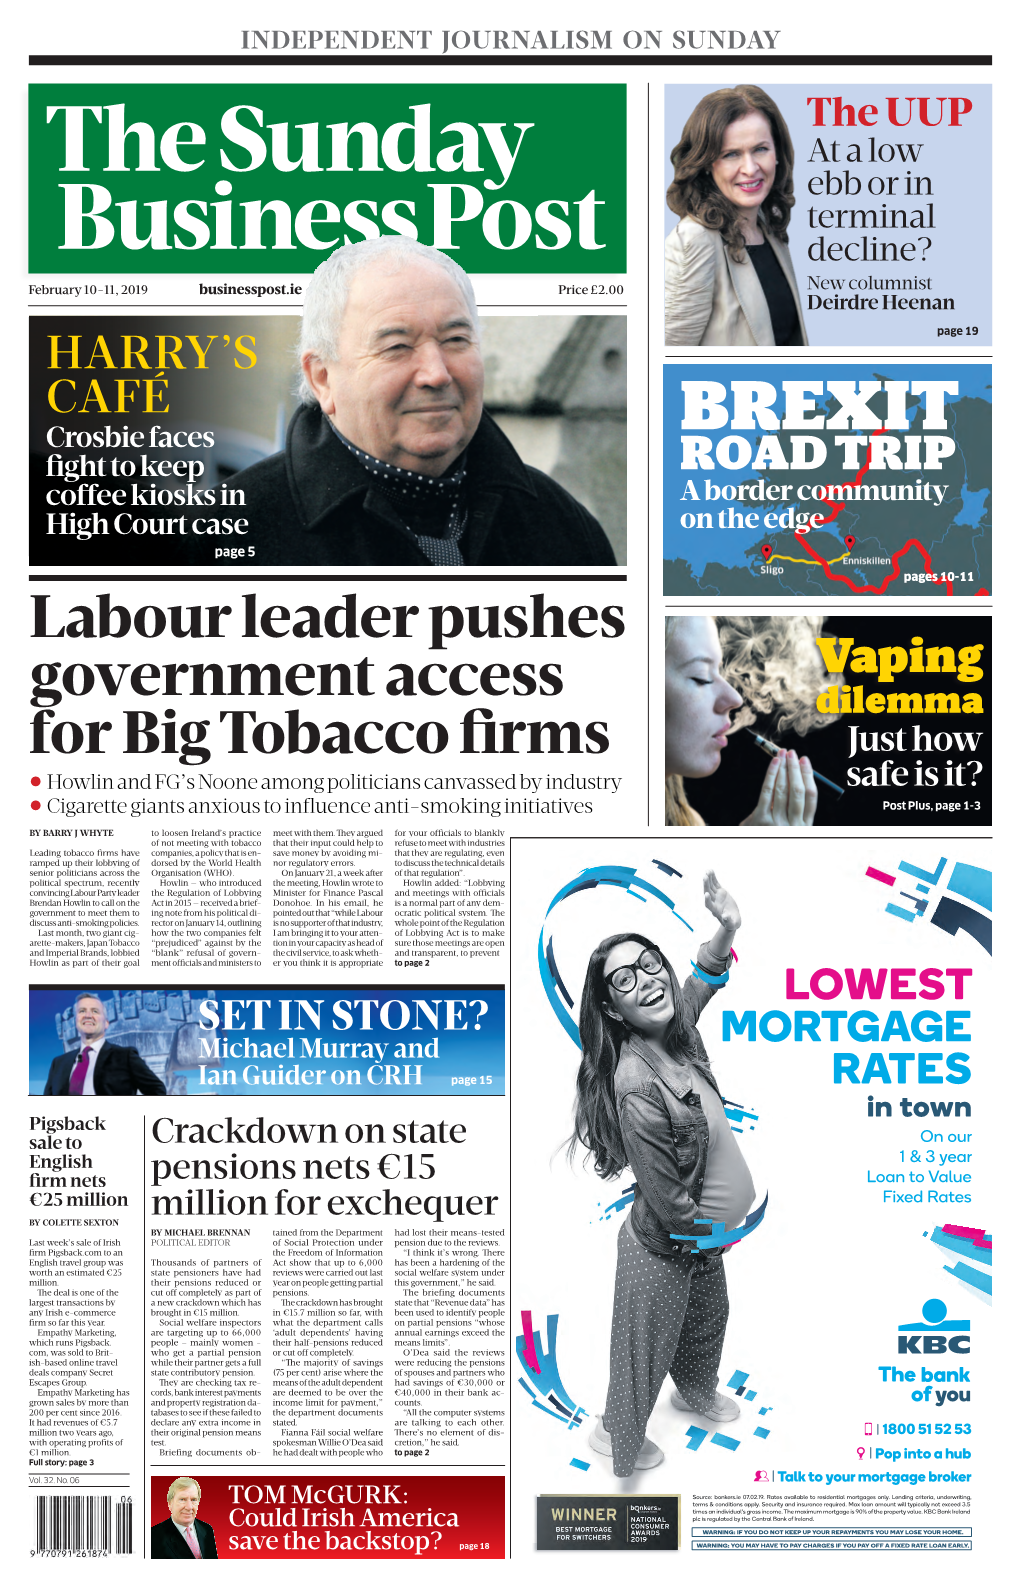 Labour Leader Pushes Government Access for Big Tobacco Firms